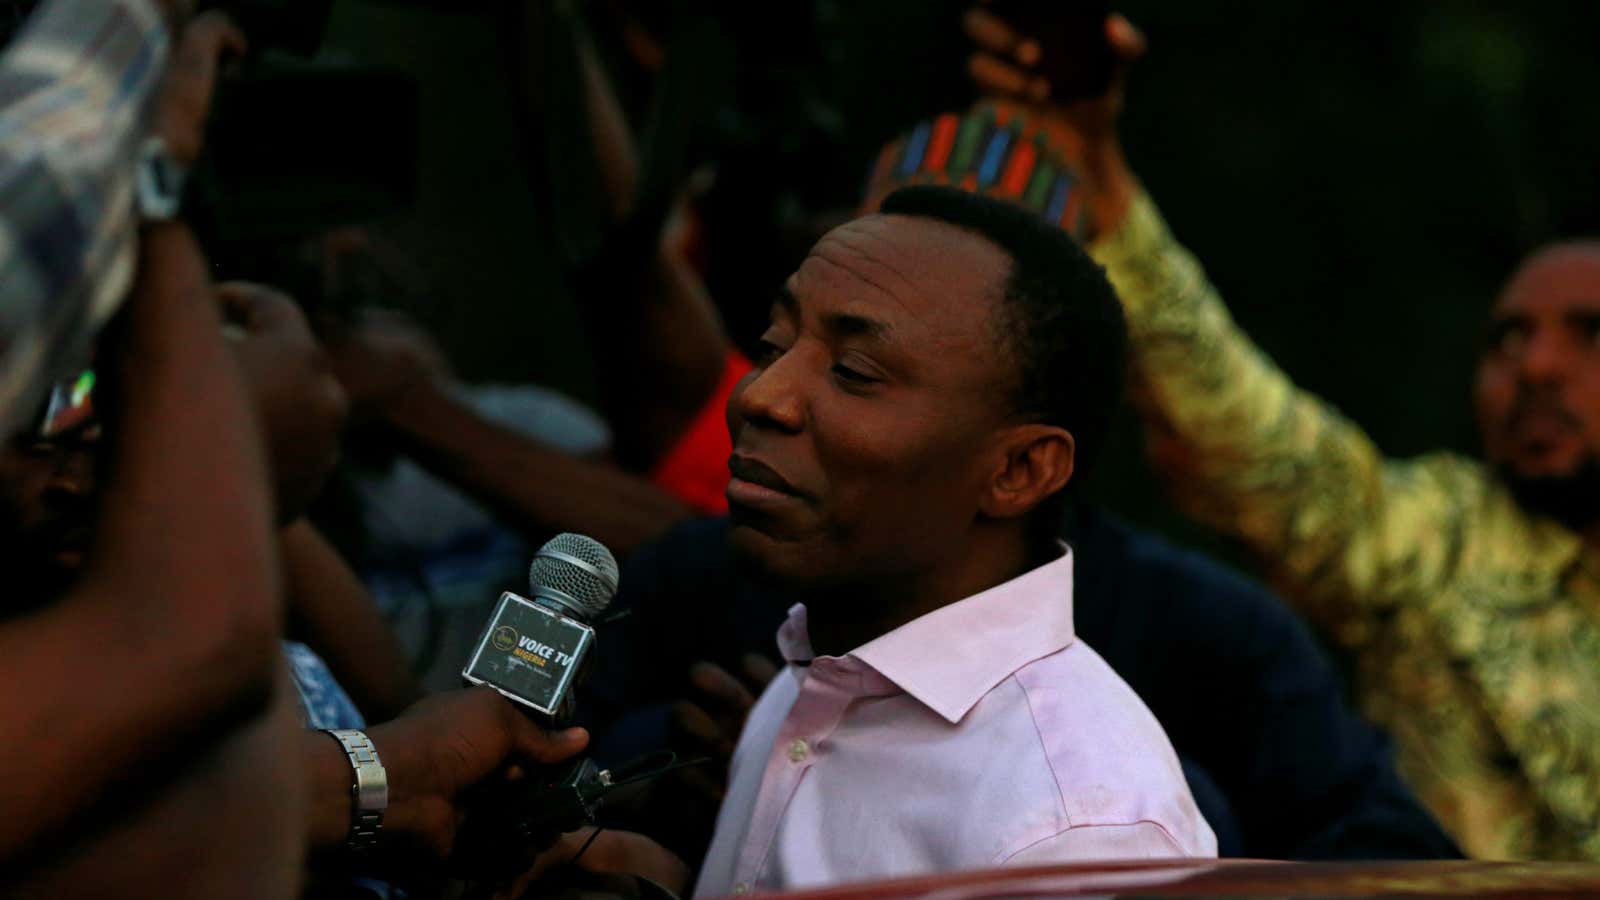 Former presidential candidate Omoyele Sowore talks to the media after being released on bail by Nigeria’s government, in Abuja, Nigeria Dec. 24, 2019.